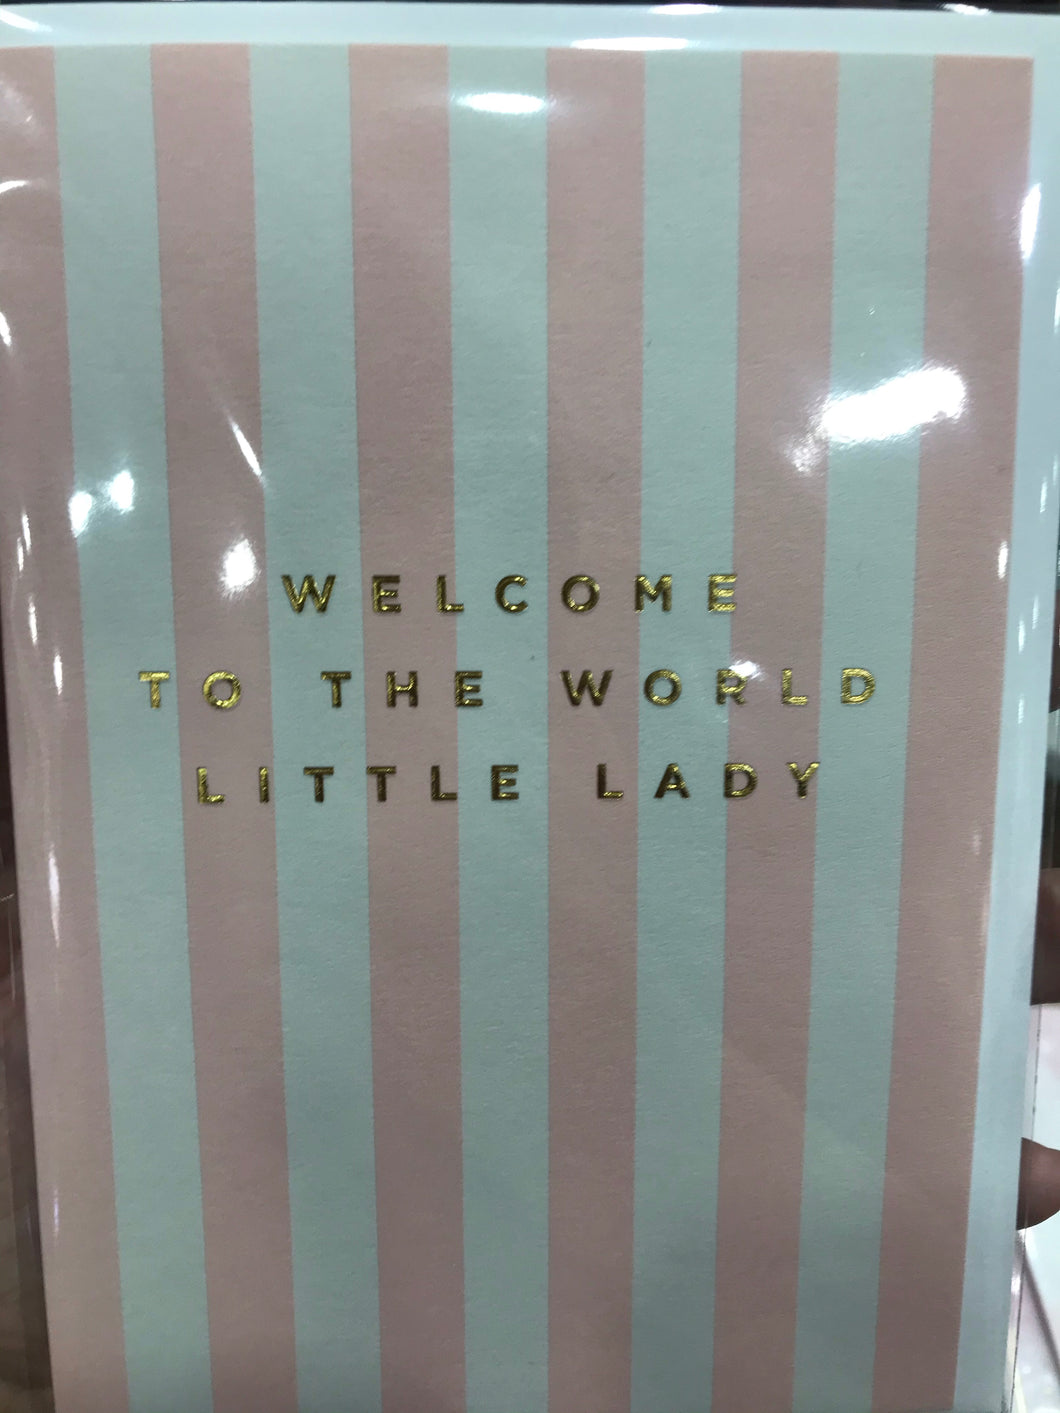 Welcome to the new world little lady card